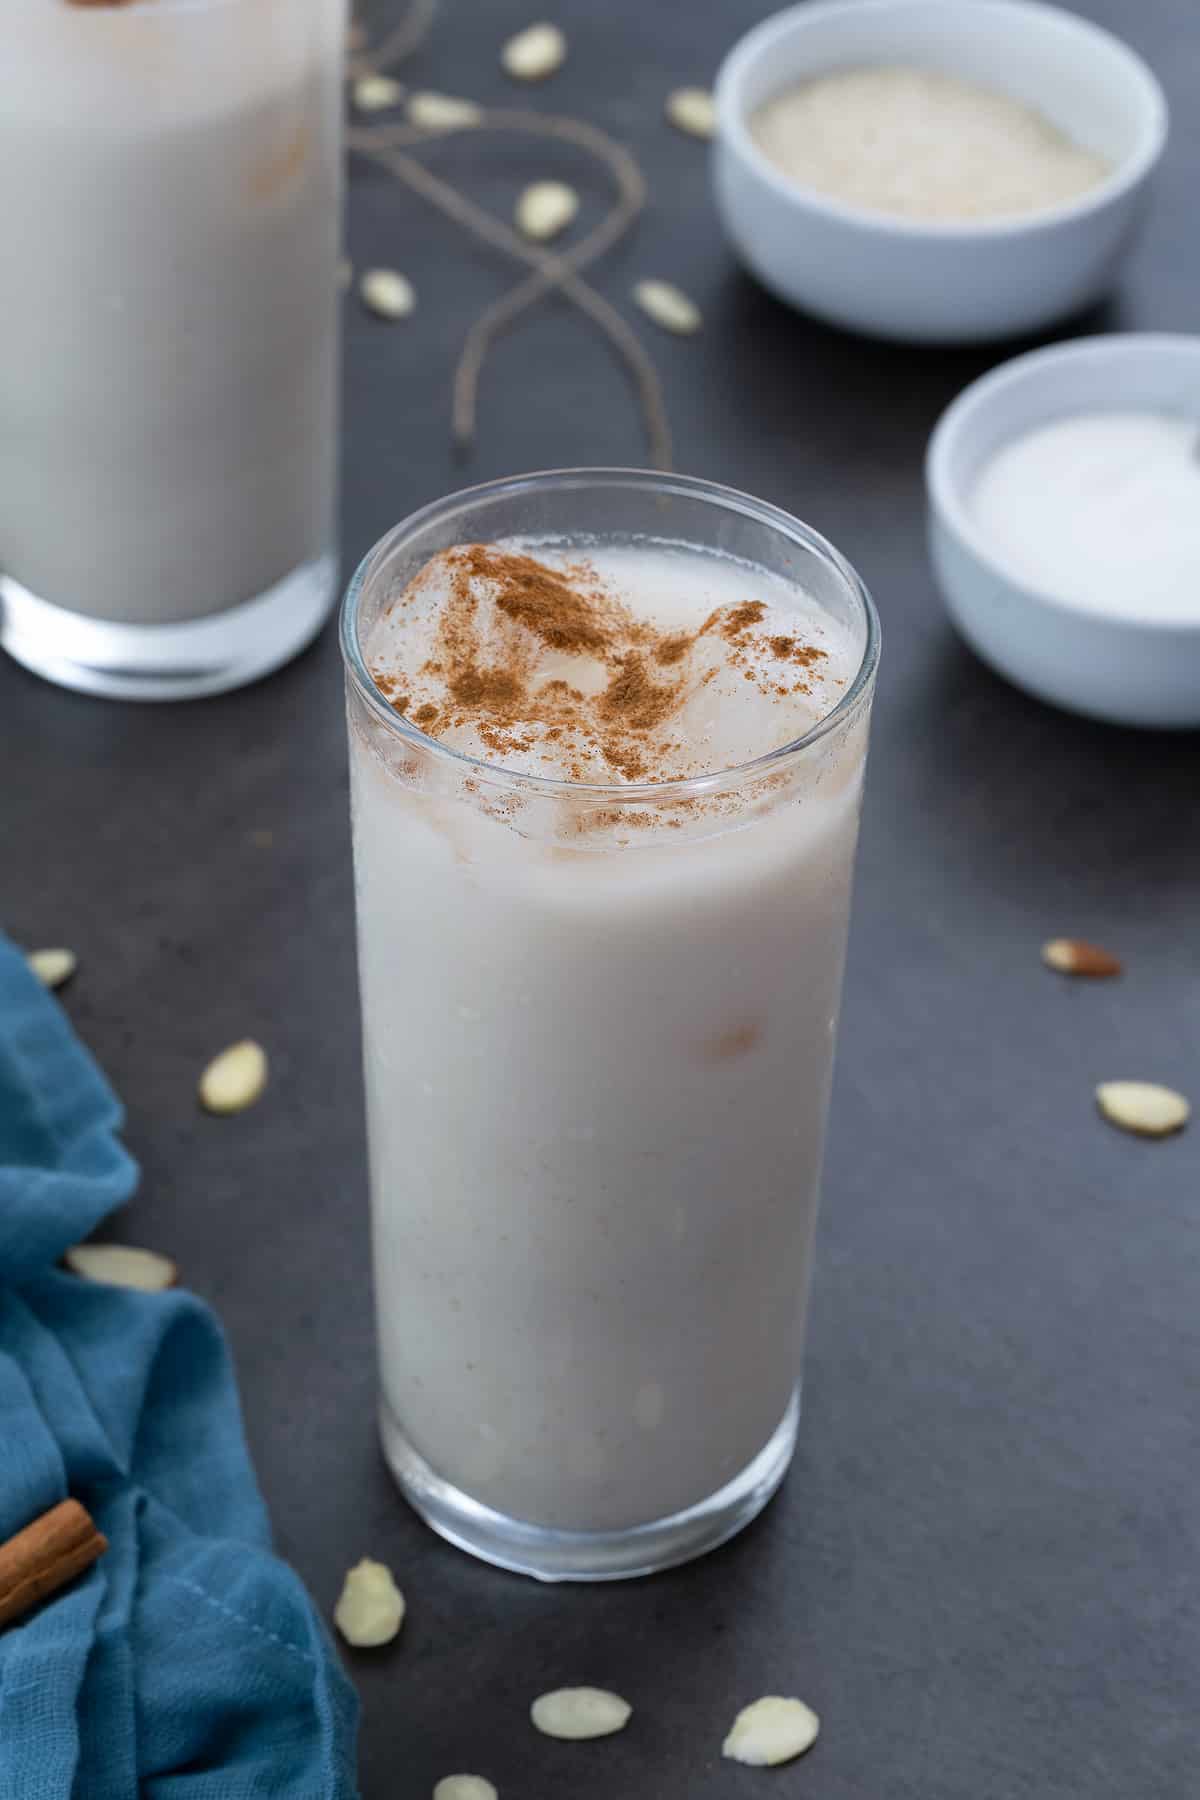 Horchata is in two glasses with few ingredients in cups and a blue towel around.